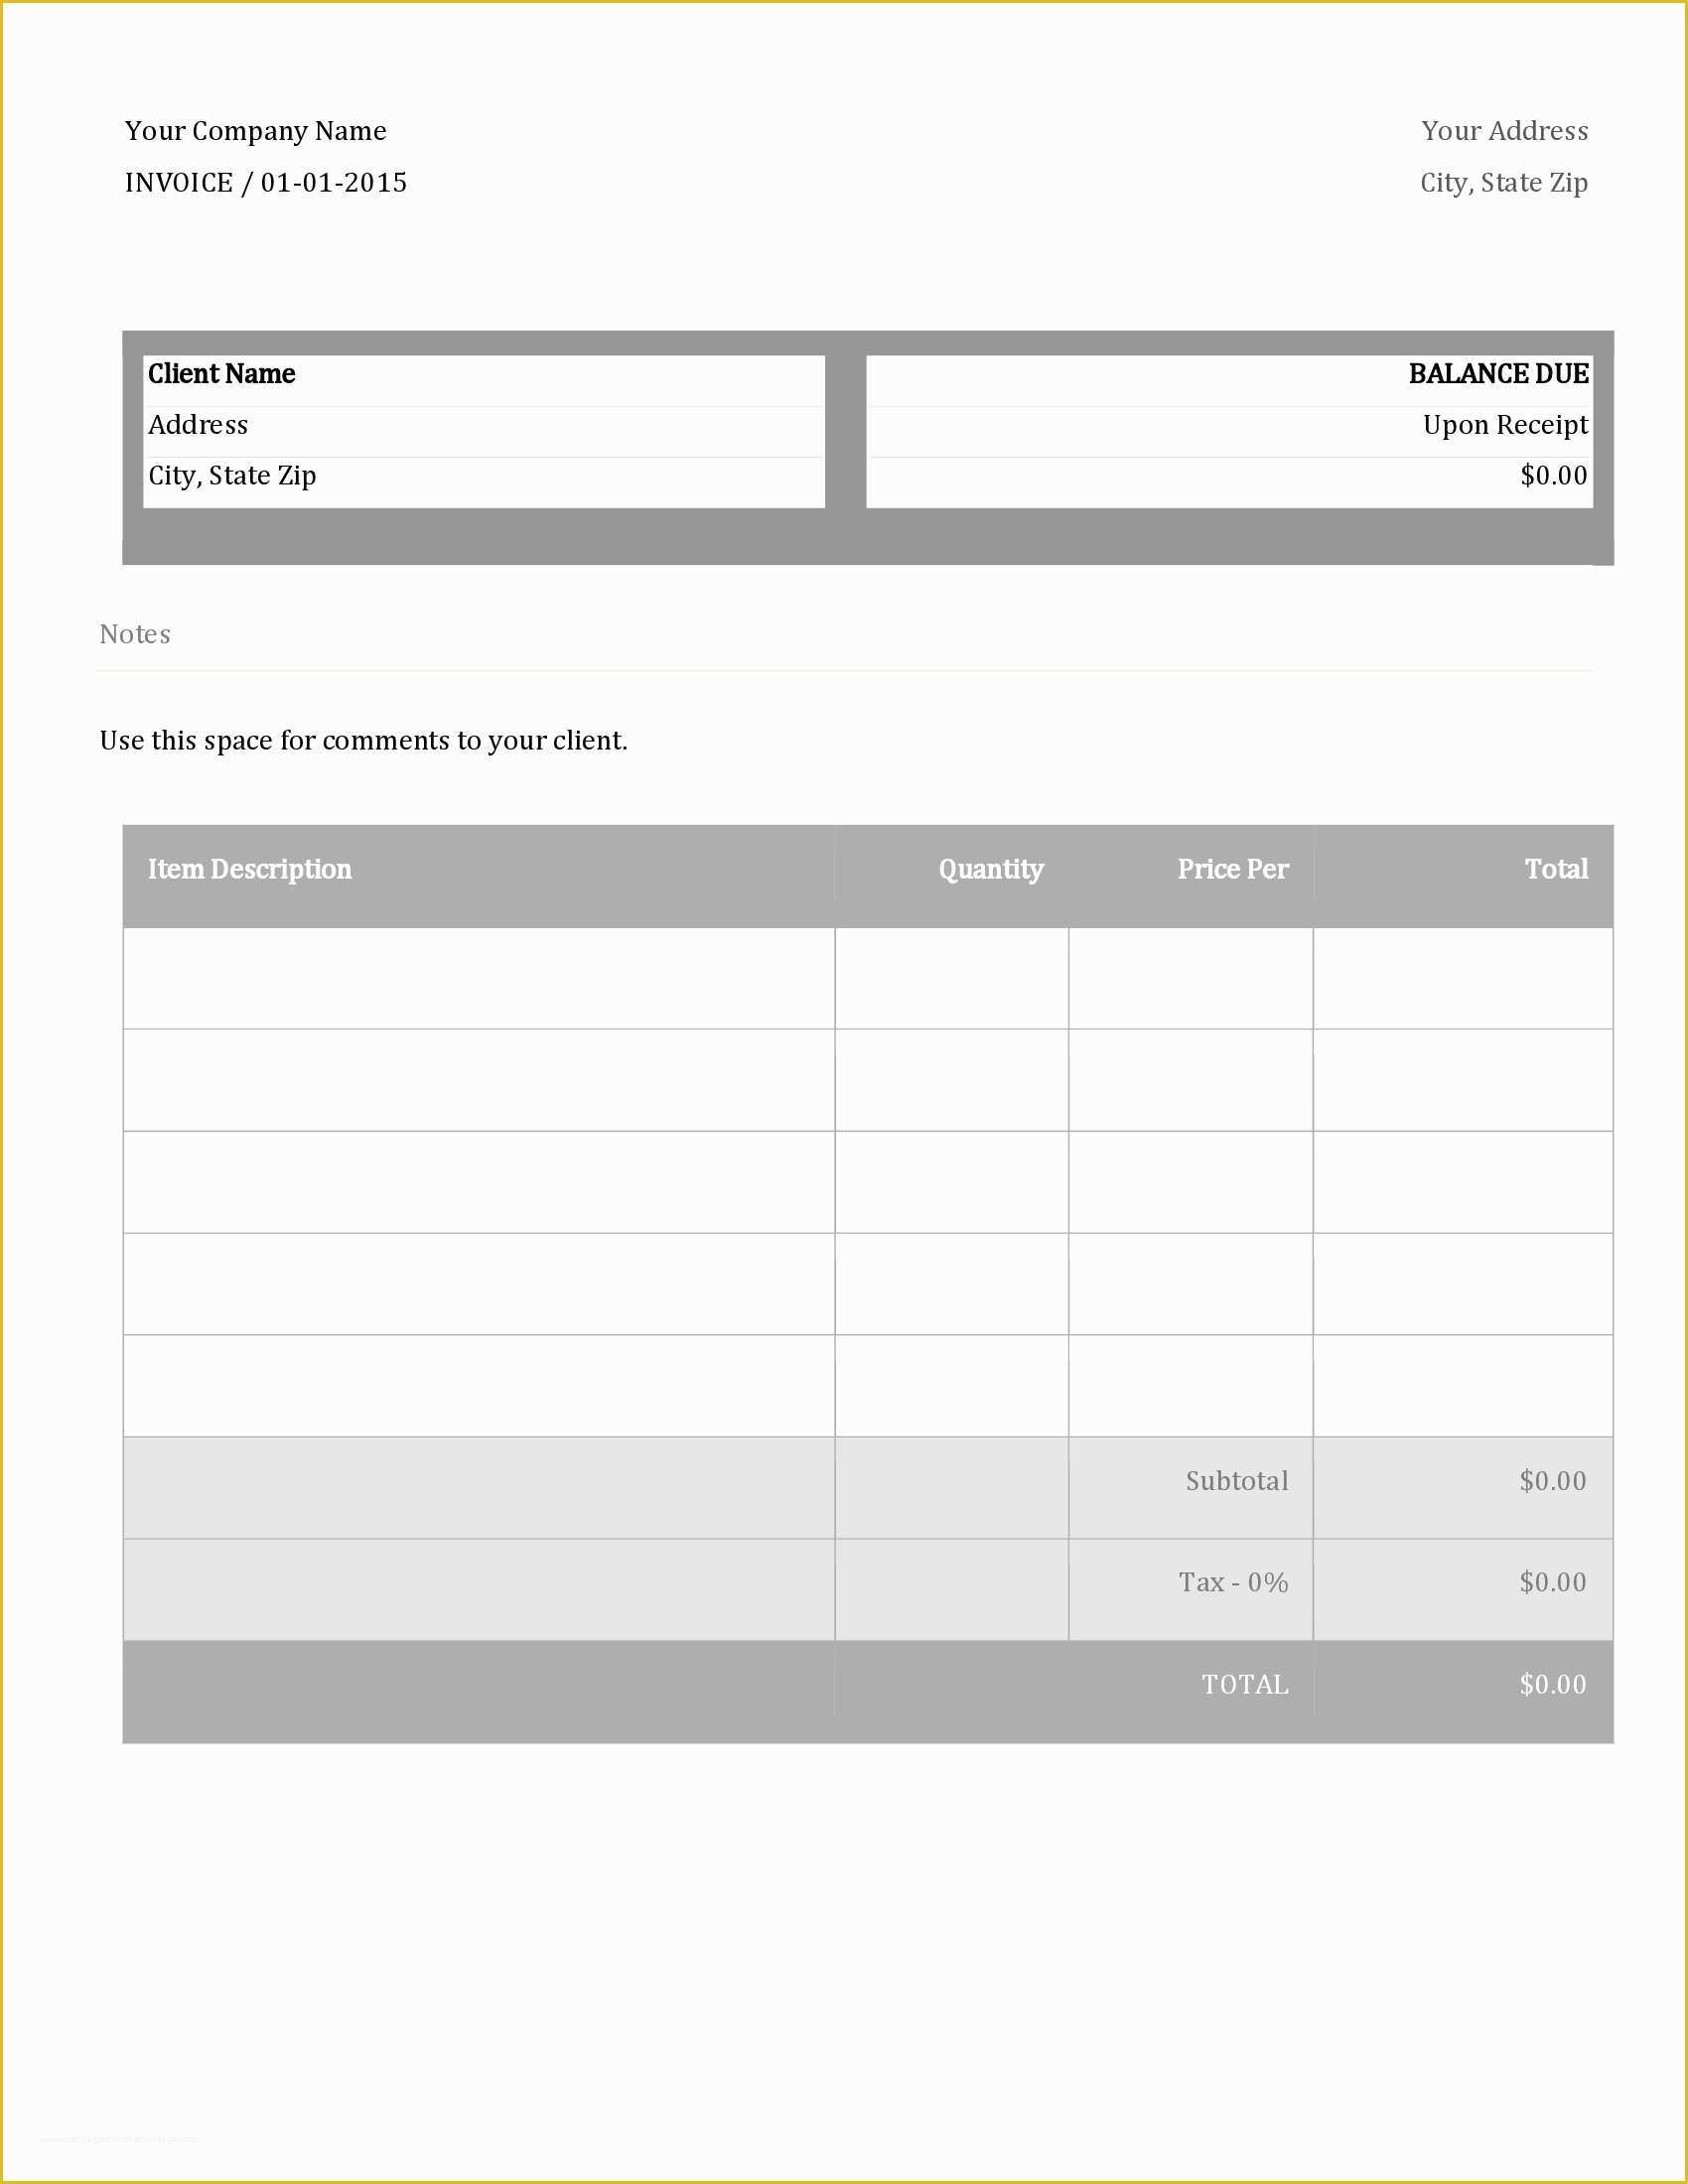 Html Invoice Template Free Download Of Blank Invoice form Free